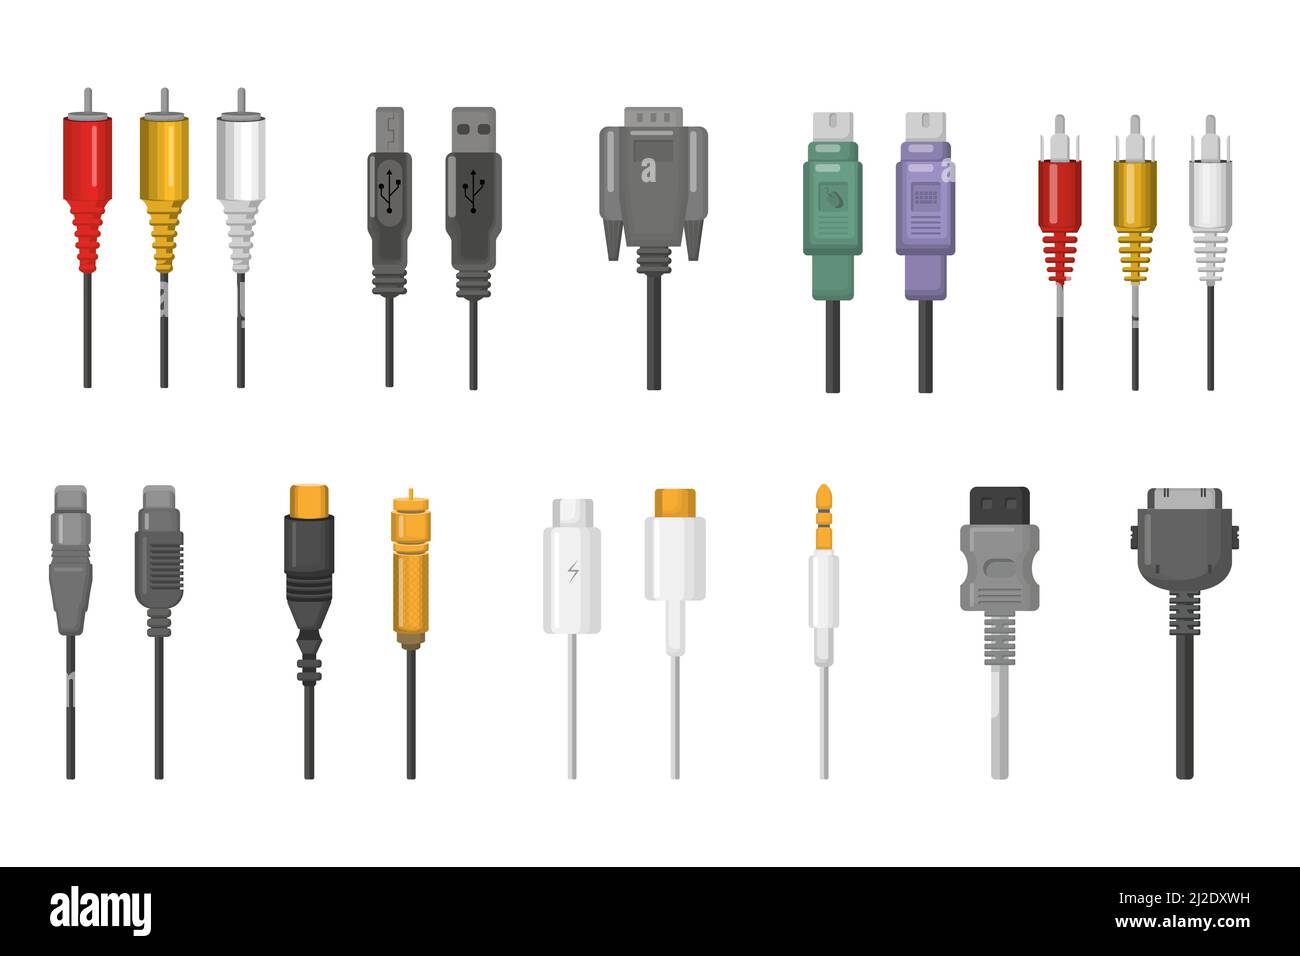 Cables and plug connectors set. Wire connections for ethernet, hdmi, vga, usb, video, audio ports. Vector illustration for cord network, compute, comm Stock Vector